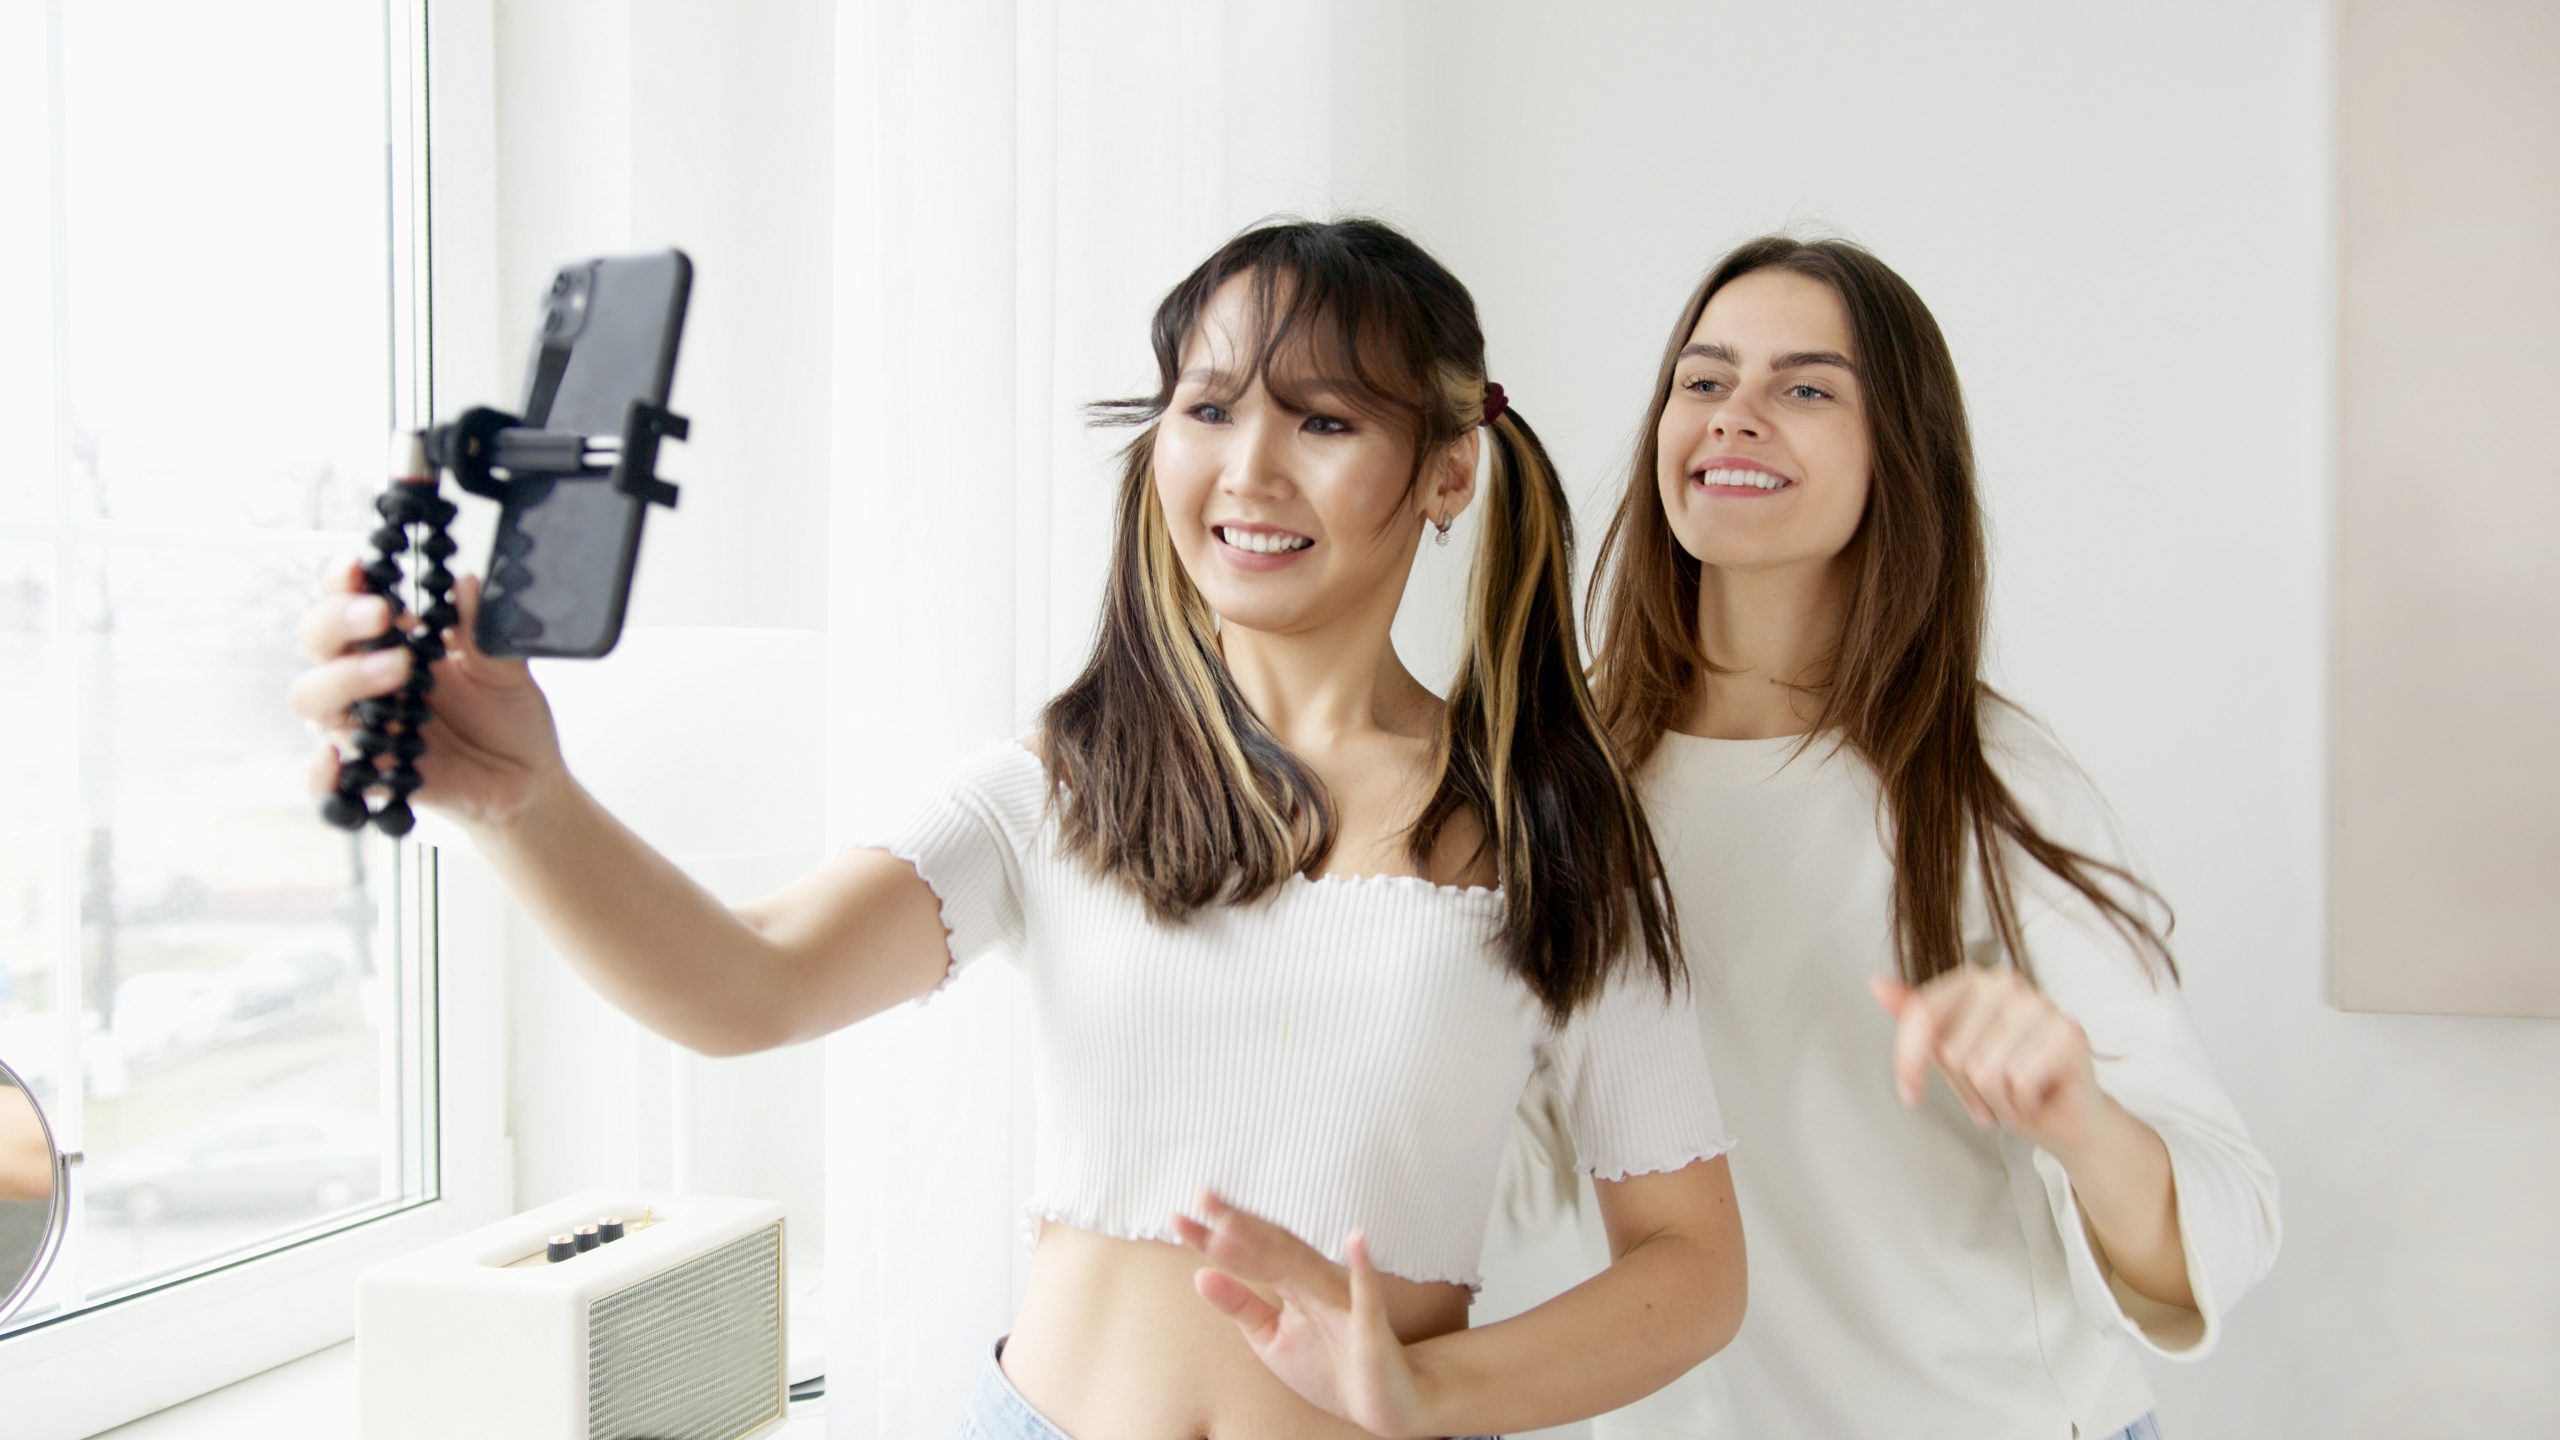 Two women looking at a phone. One is holding the phone towards them like they are taking a video. 